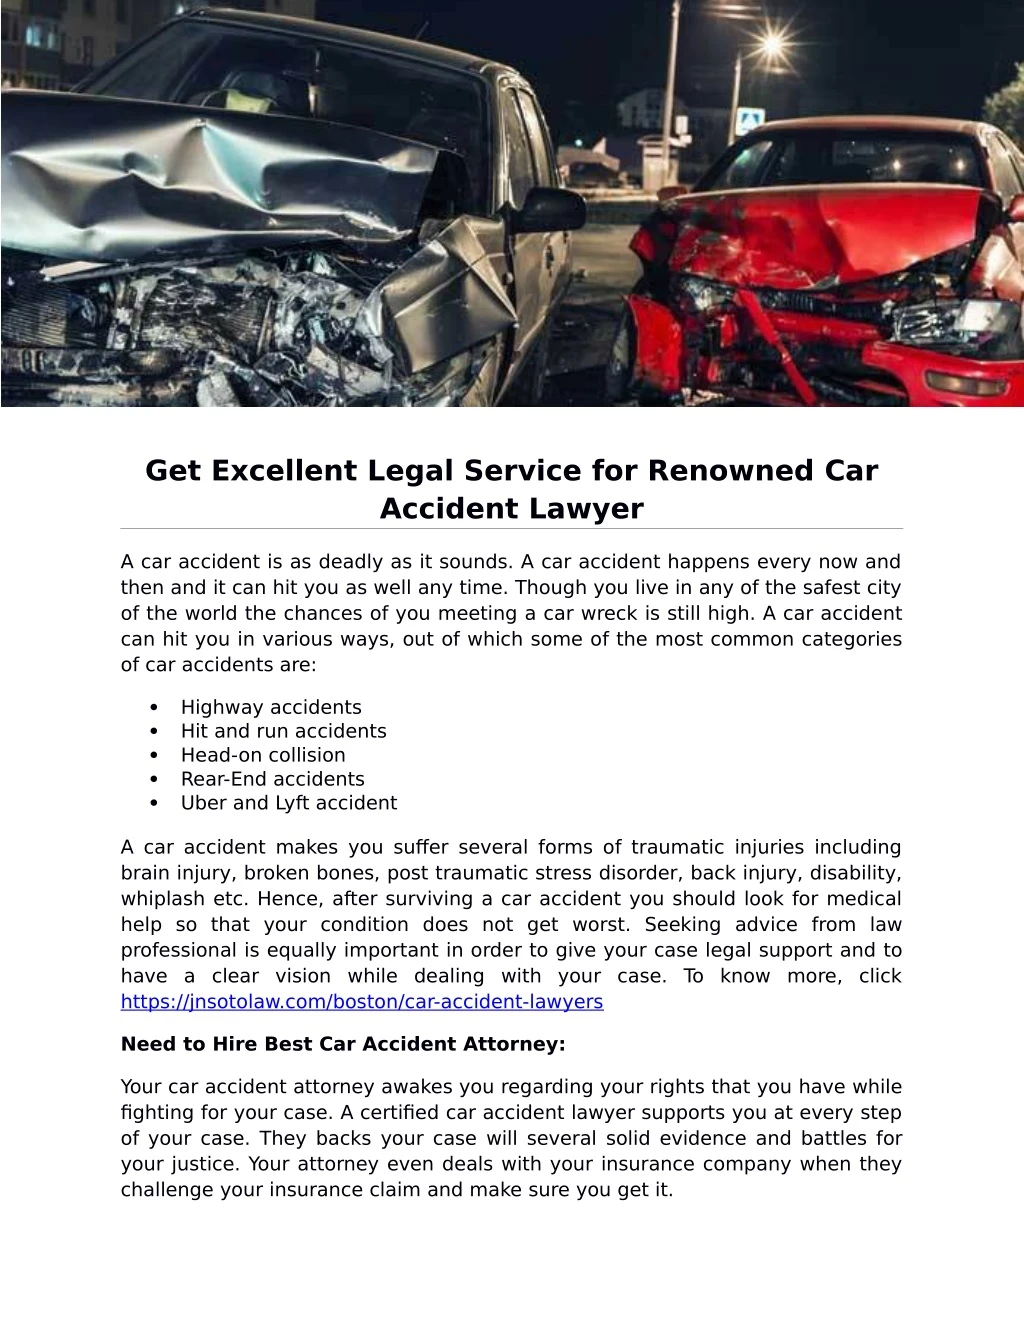 get excellent legal service for renowned